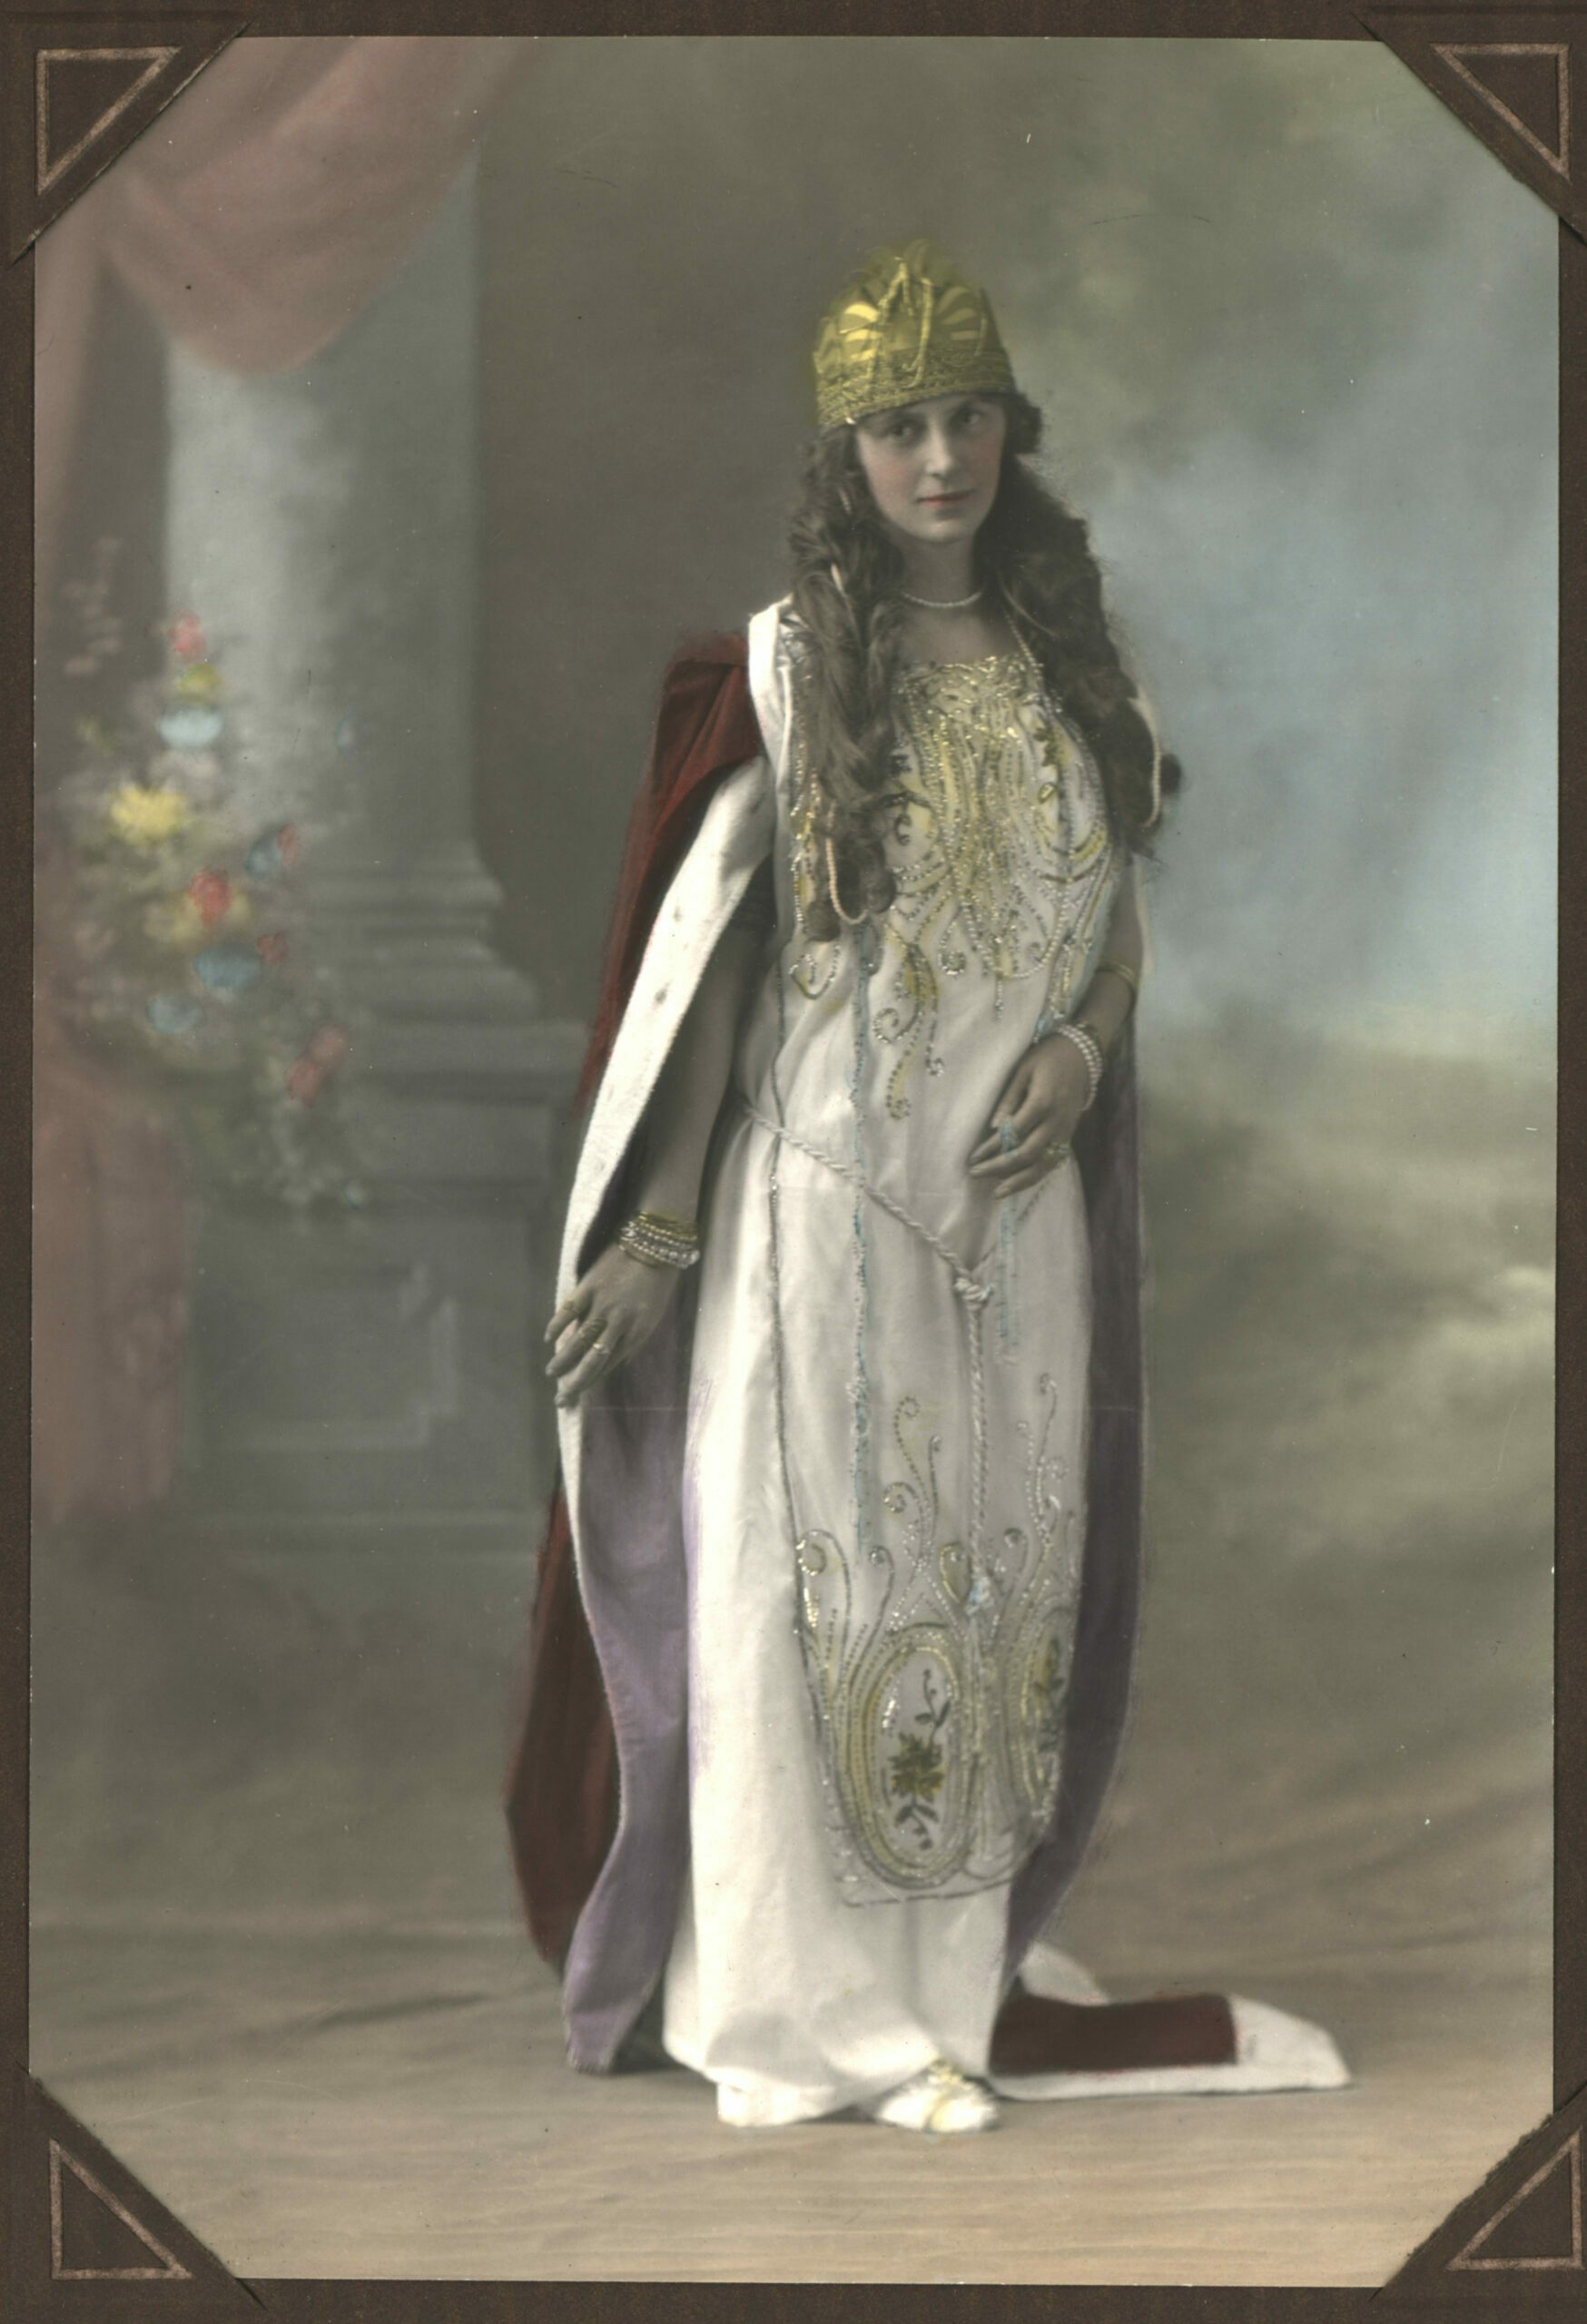 SM Coll Helen Hanks in colorized image